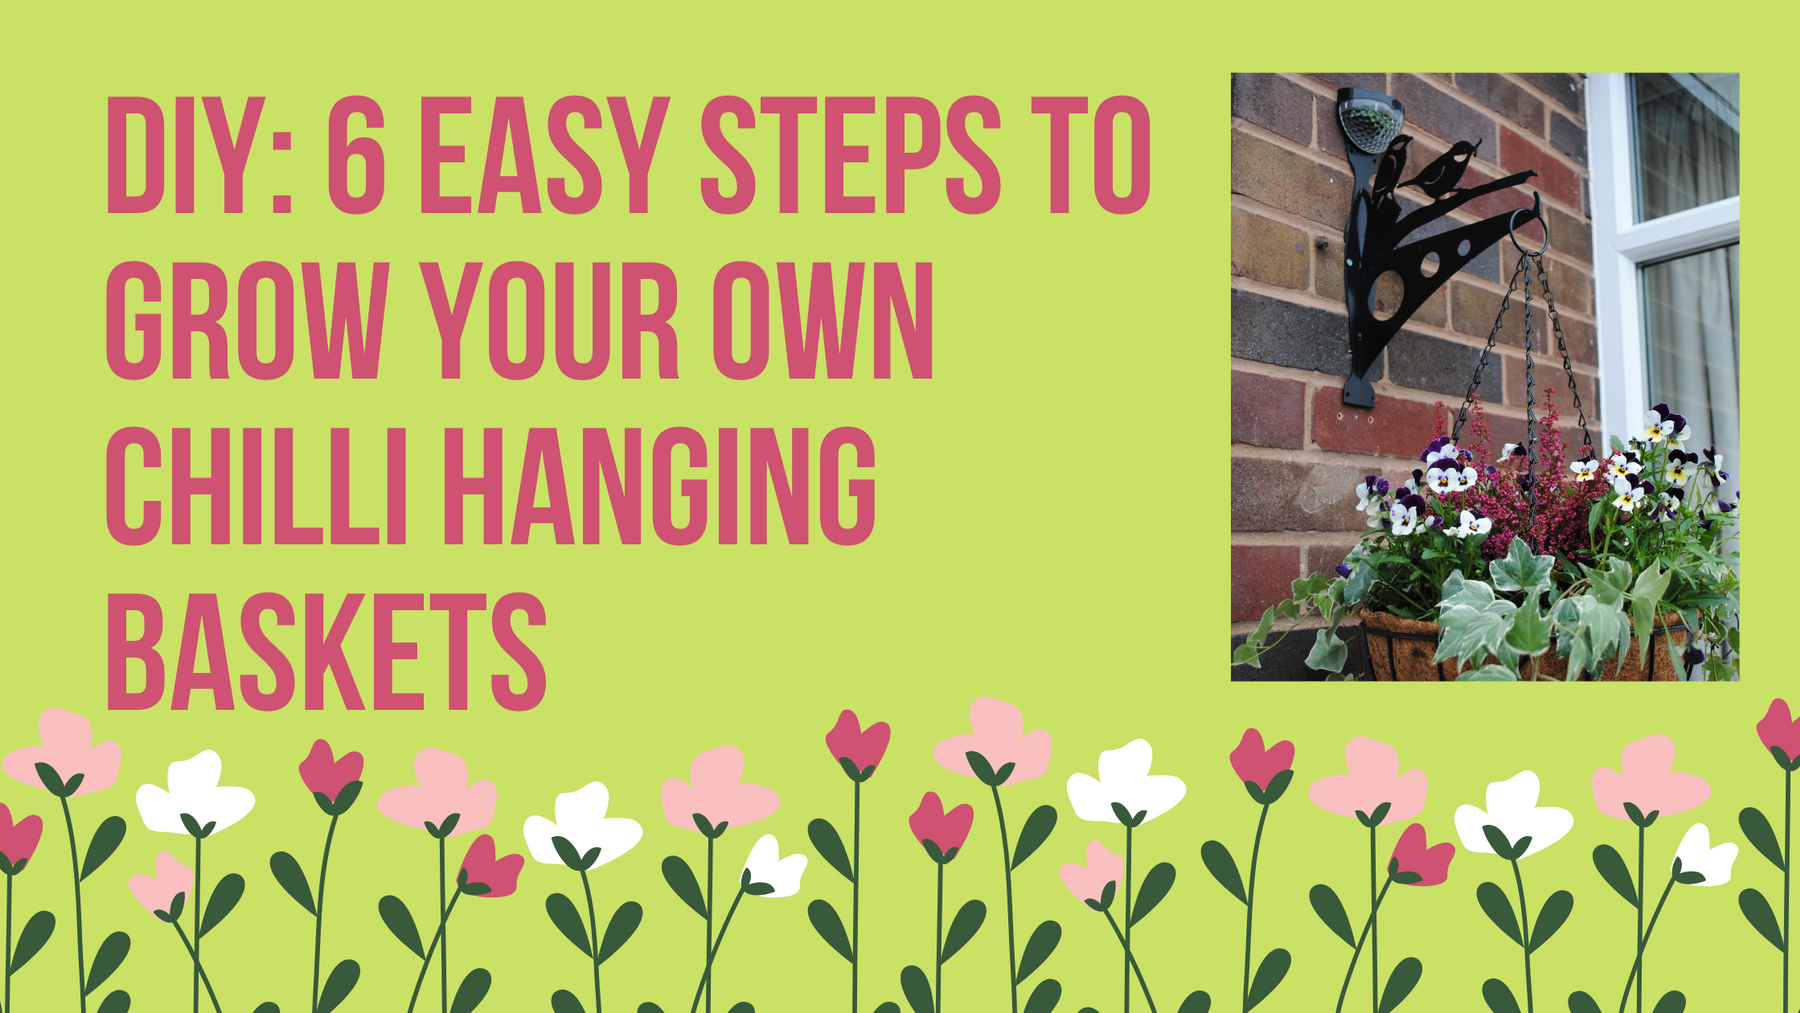 6 Easy Steps to Grow Your Own Chilli Hanging Basket! | Flory's Online